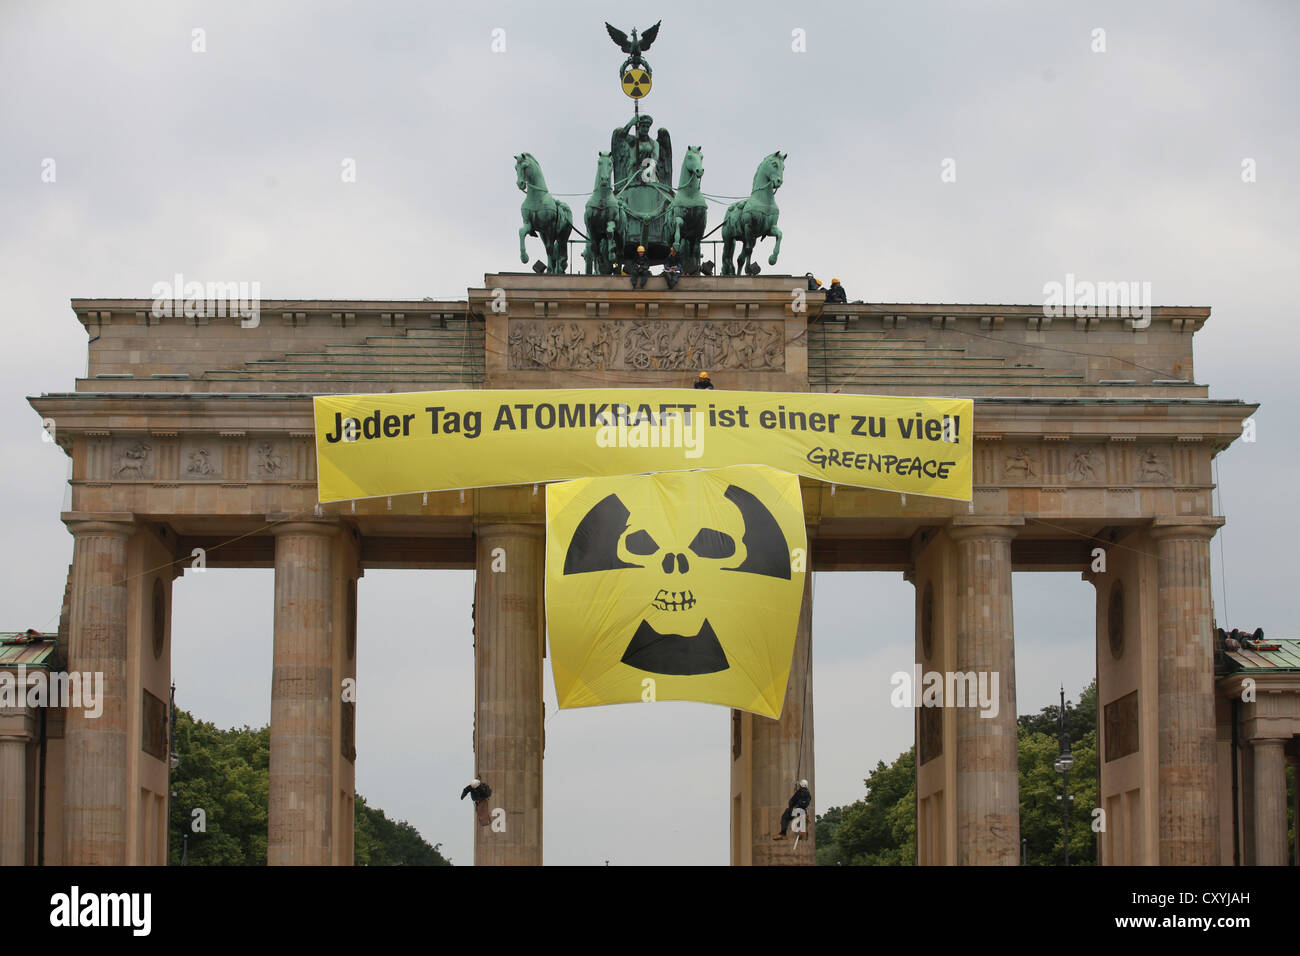 Protest against nuclear power, Greenpeace activists occupy the Brandenburg Gate, Berlin Stock Photo